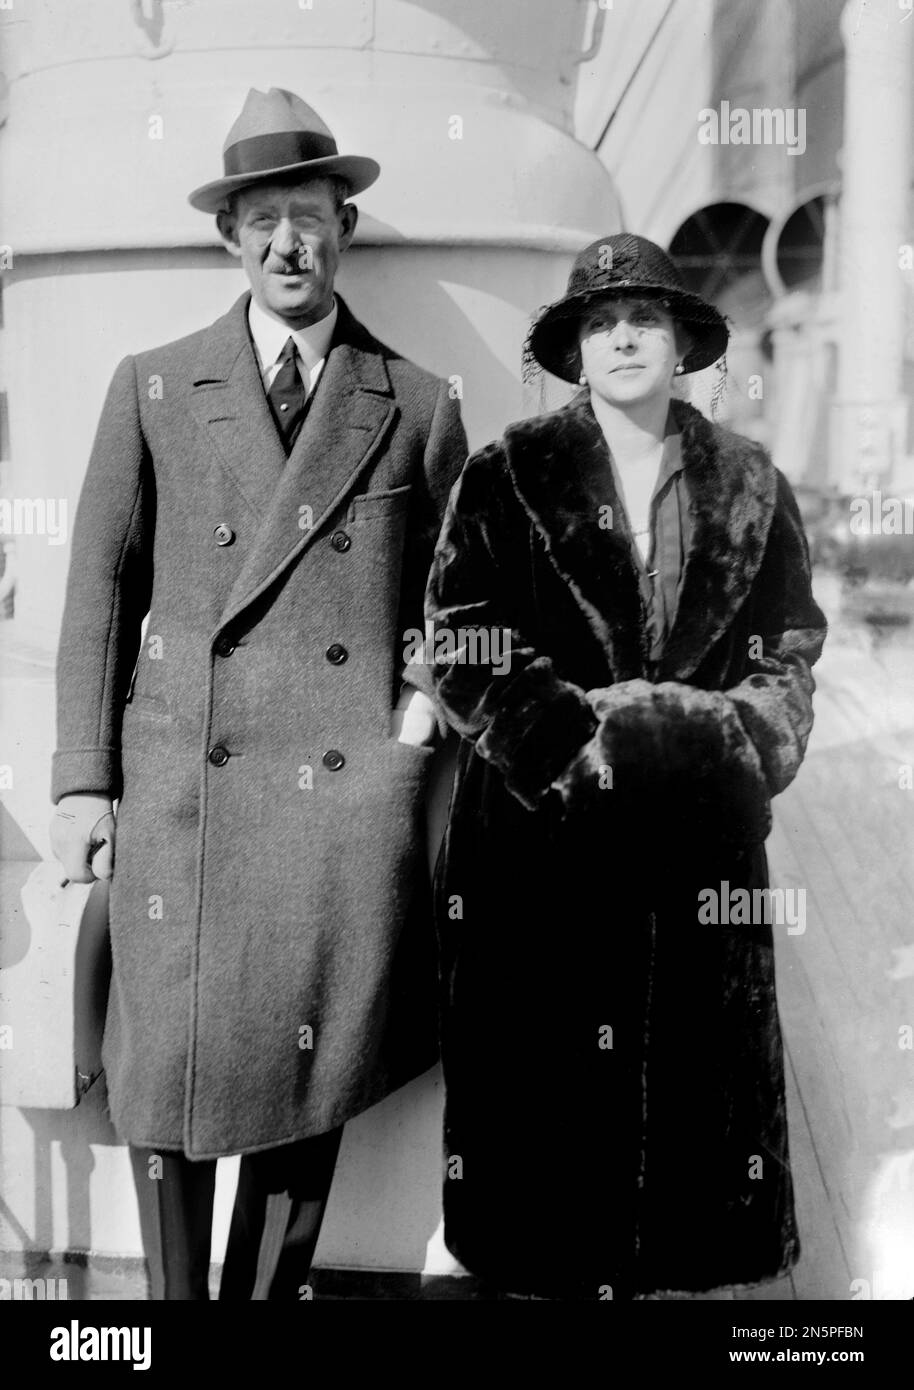 Prince Andrew of Greece and Princess Alice of Battenberg. Portrait of the parents of Prince Philip, Princess Alice of Battenberg (Victoria Alice Elizabeth Julia Marie: 1885 -1969) and her husband, Prince Andrew of Greece and Denmark (1882-1944), c. 1920-25 Stock Photo